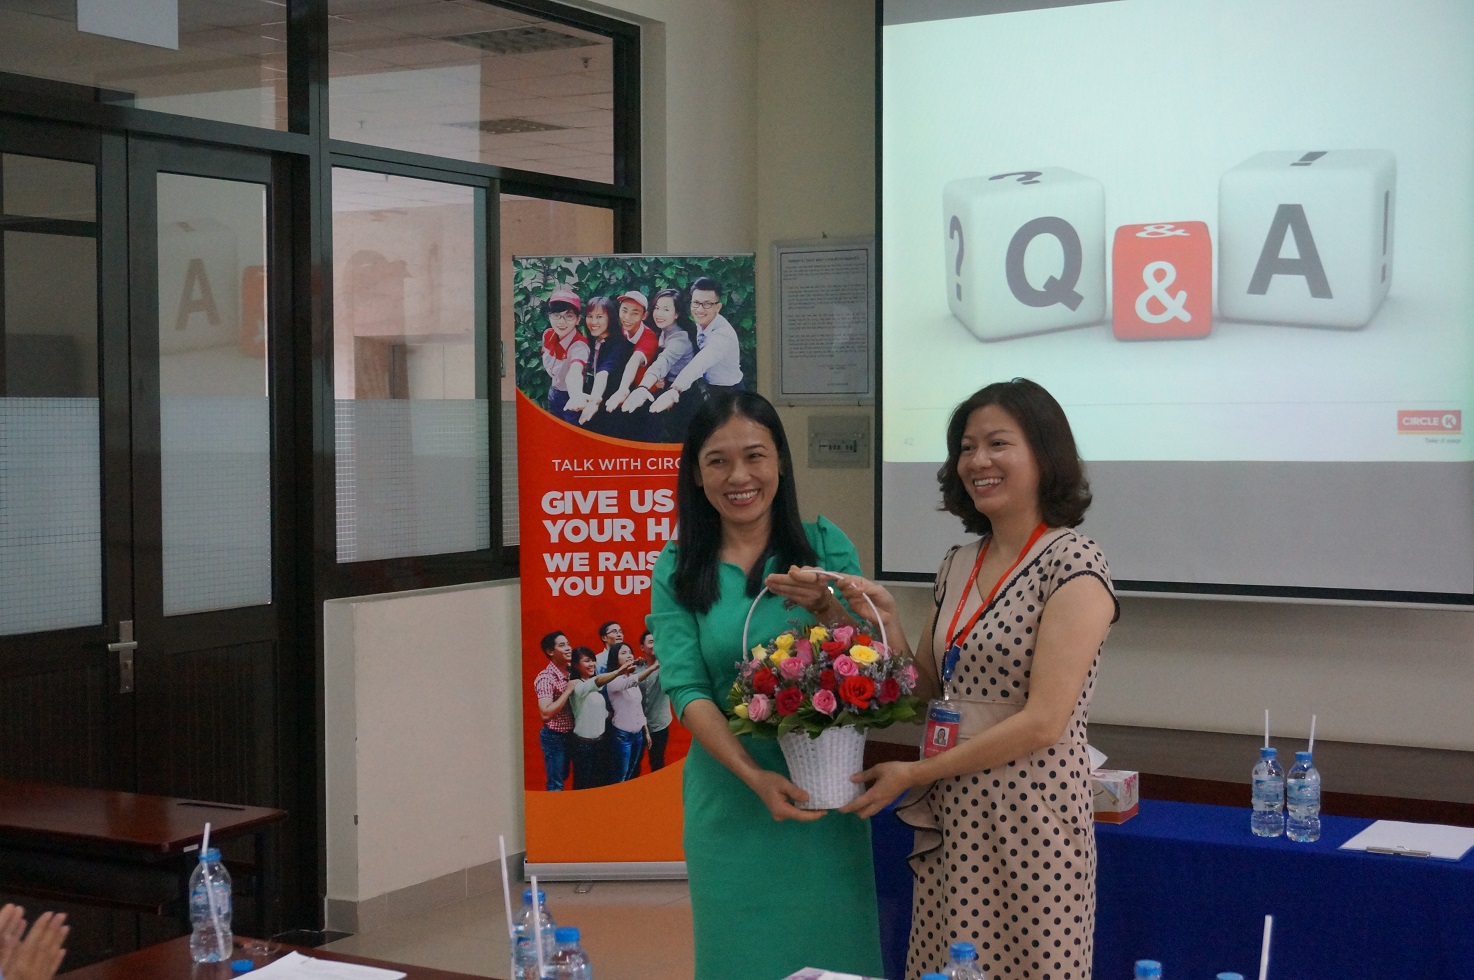 Ms. Le Thi Thuy Phuong, Head of Marketing Department presents a souvenir to Ms. Nguyen Thi Thu Thao - Chief Human Resources Circle K.